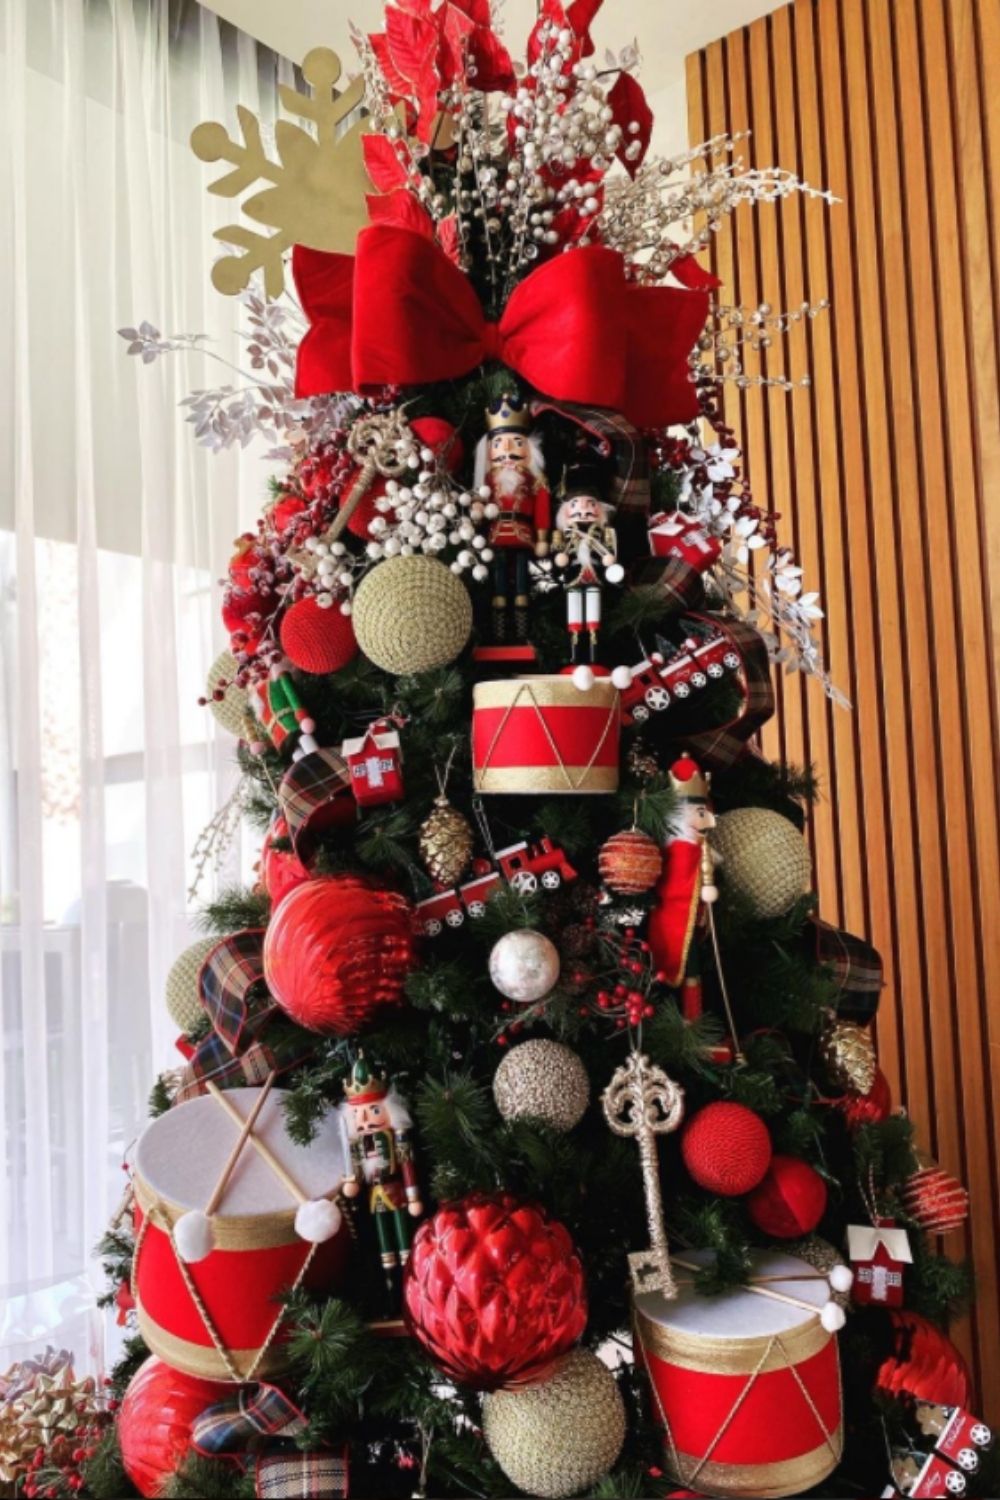 Red-Themed Christmas Tree